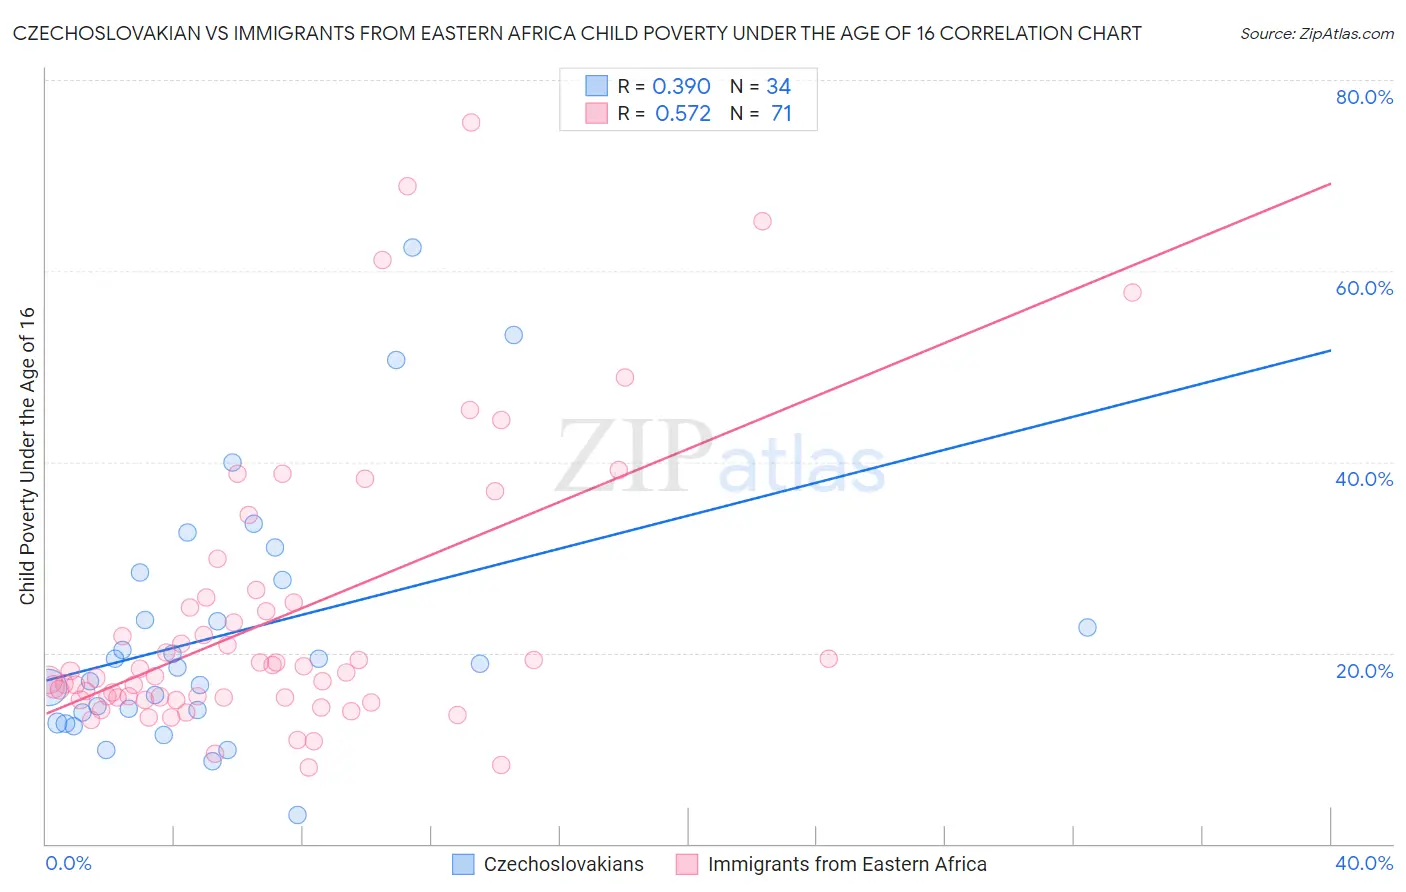 Czechoslovakian vs Immigrants from Eastern Africa Child Poverty Under the Age of 16